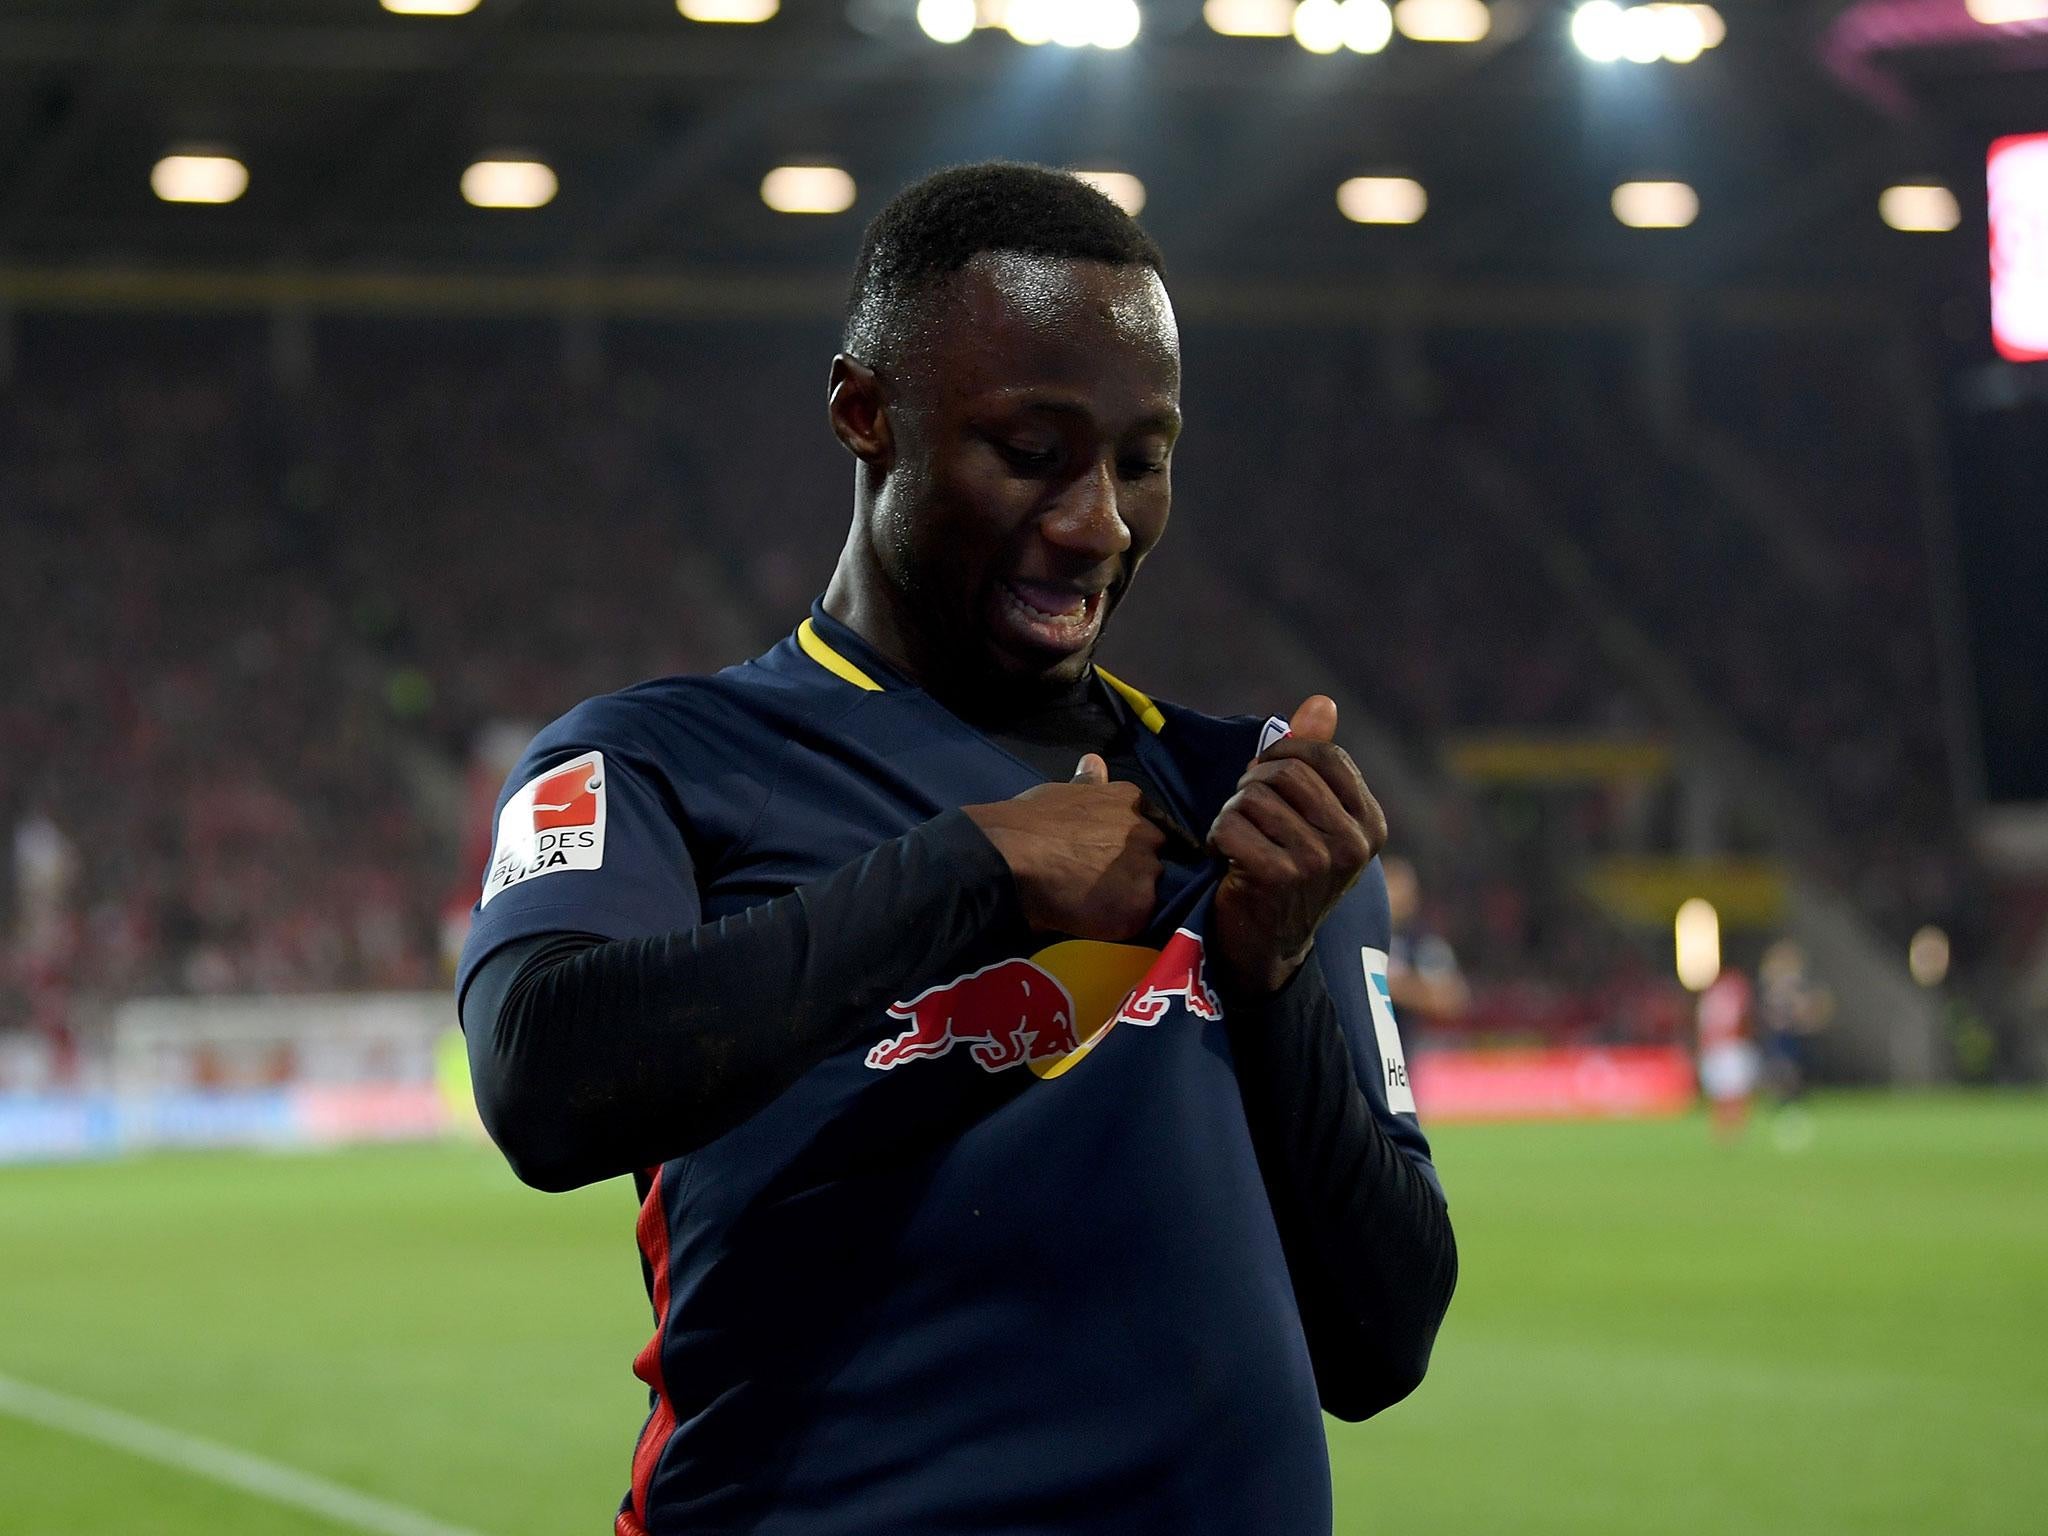 Keita feels he is ready to leave Leipzig - but they have other ideas